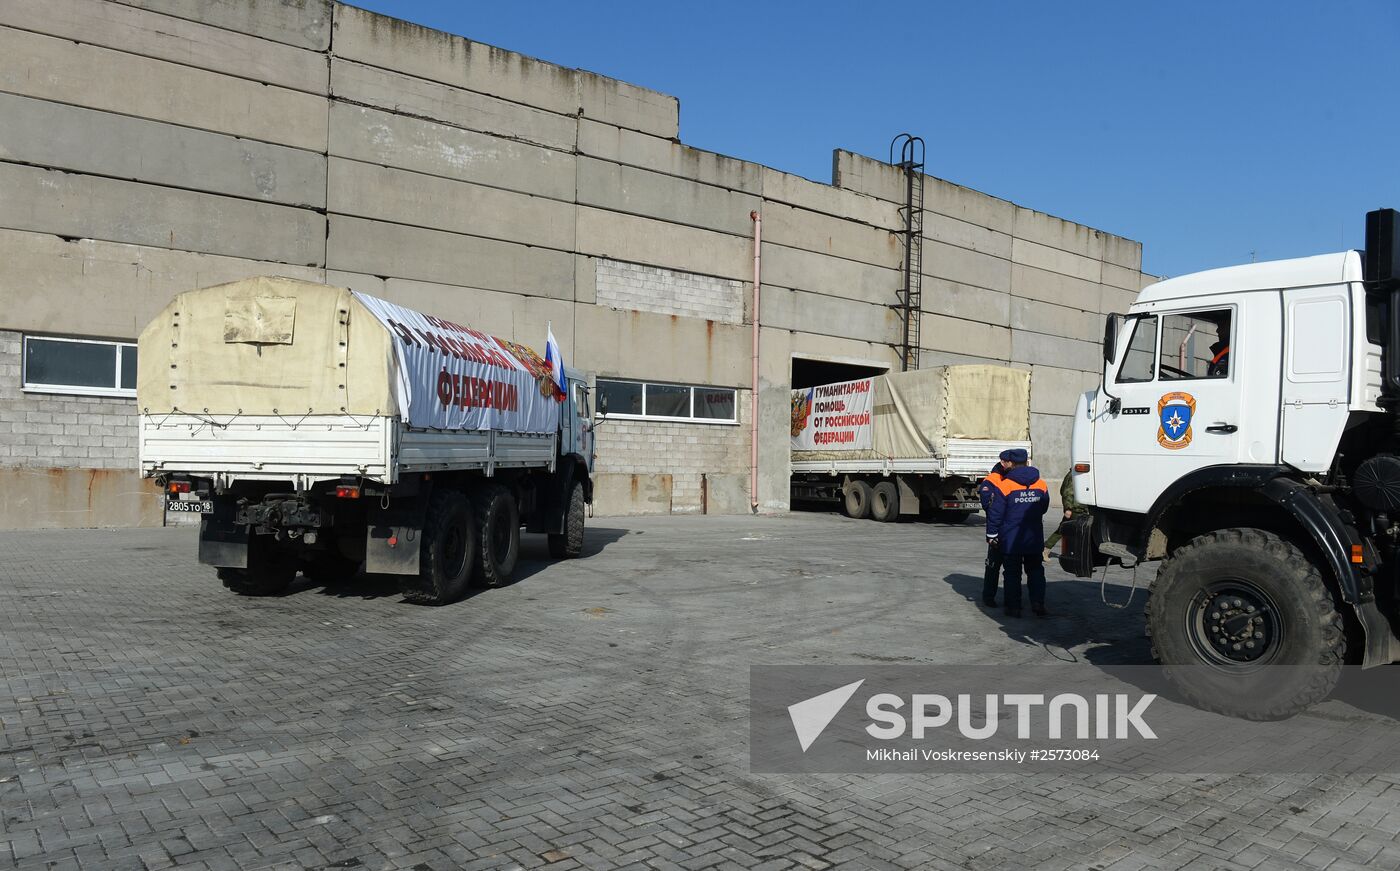 Russian 14th humanitarian aid convoy arrives in southeastern Ukraine